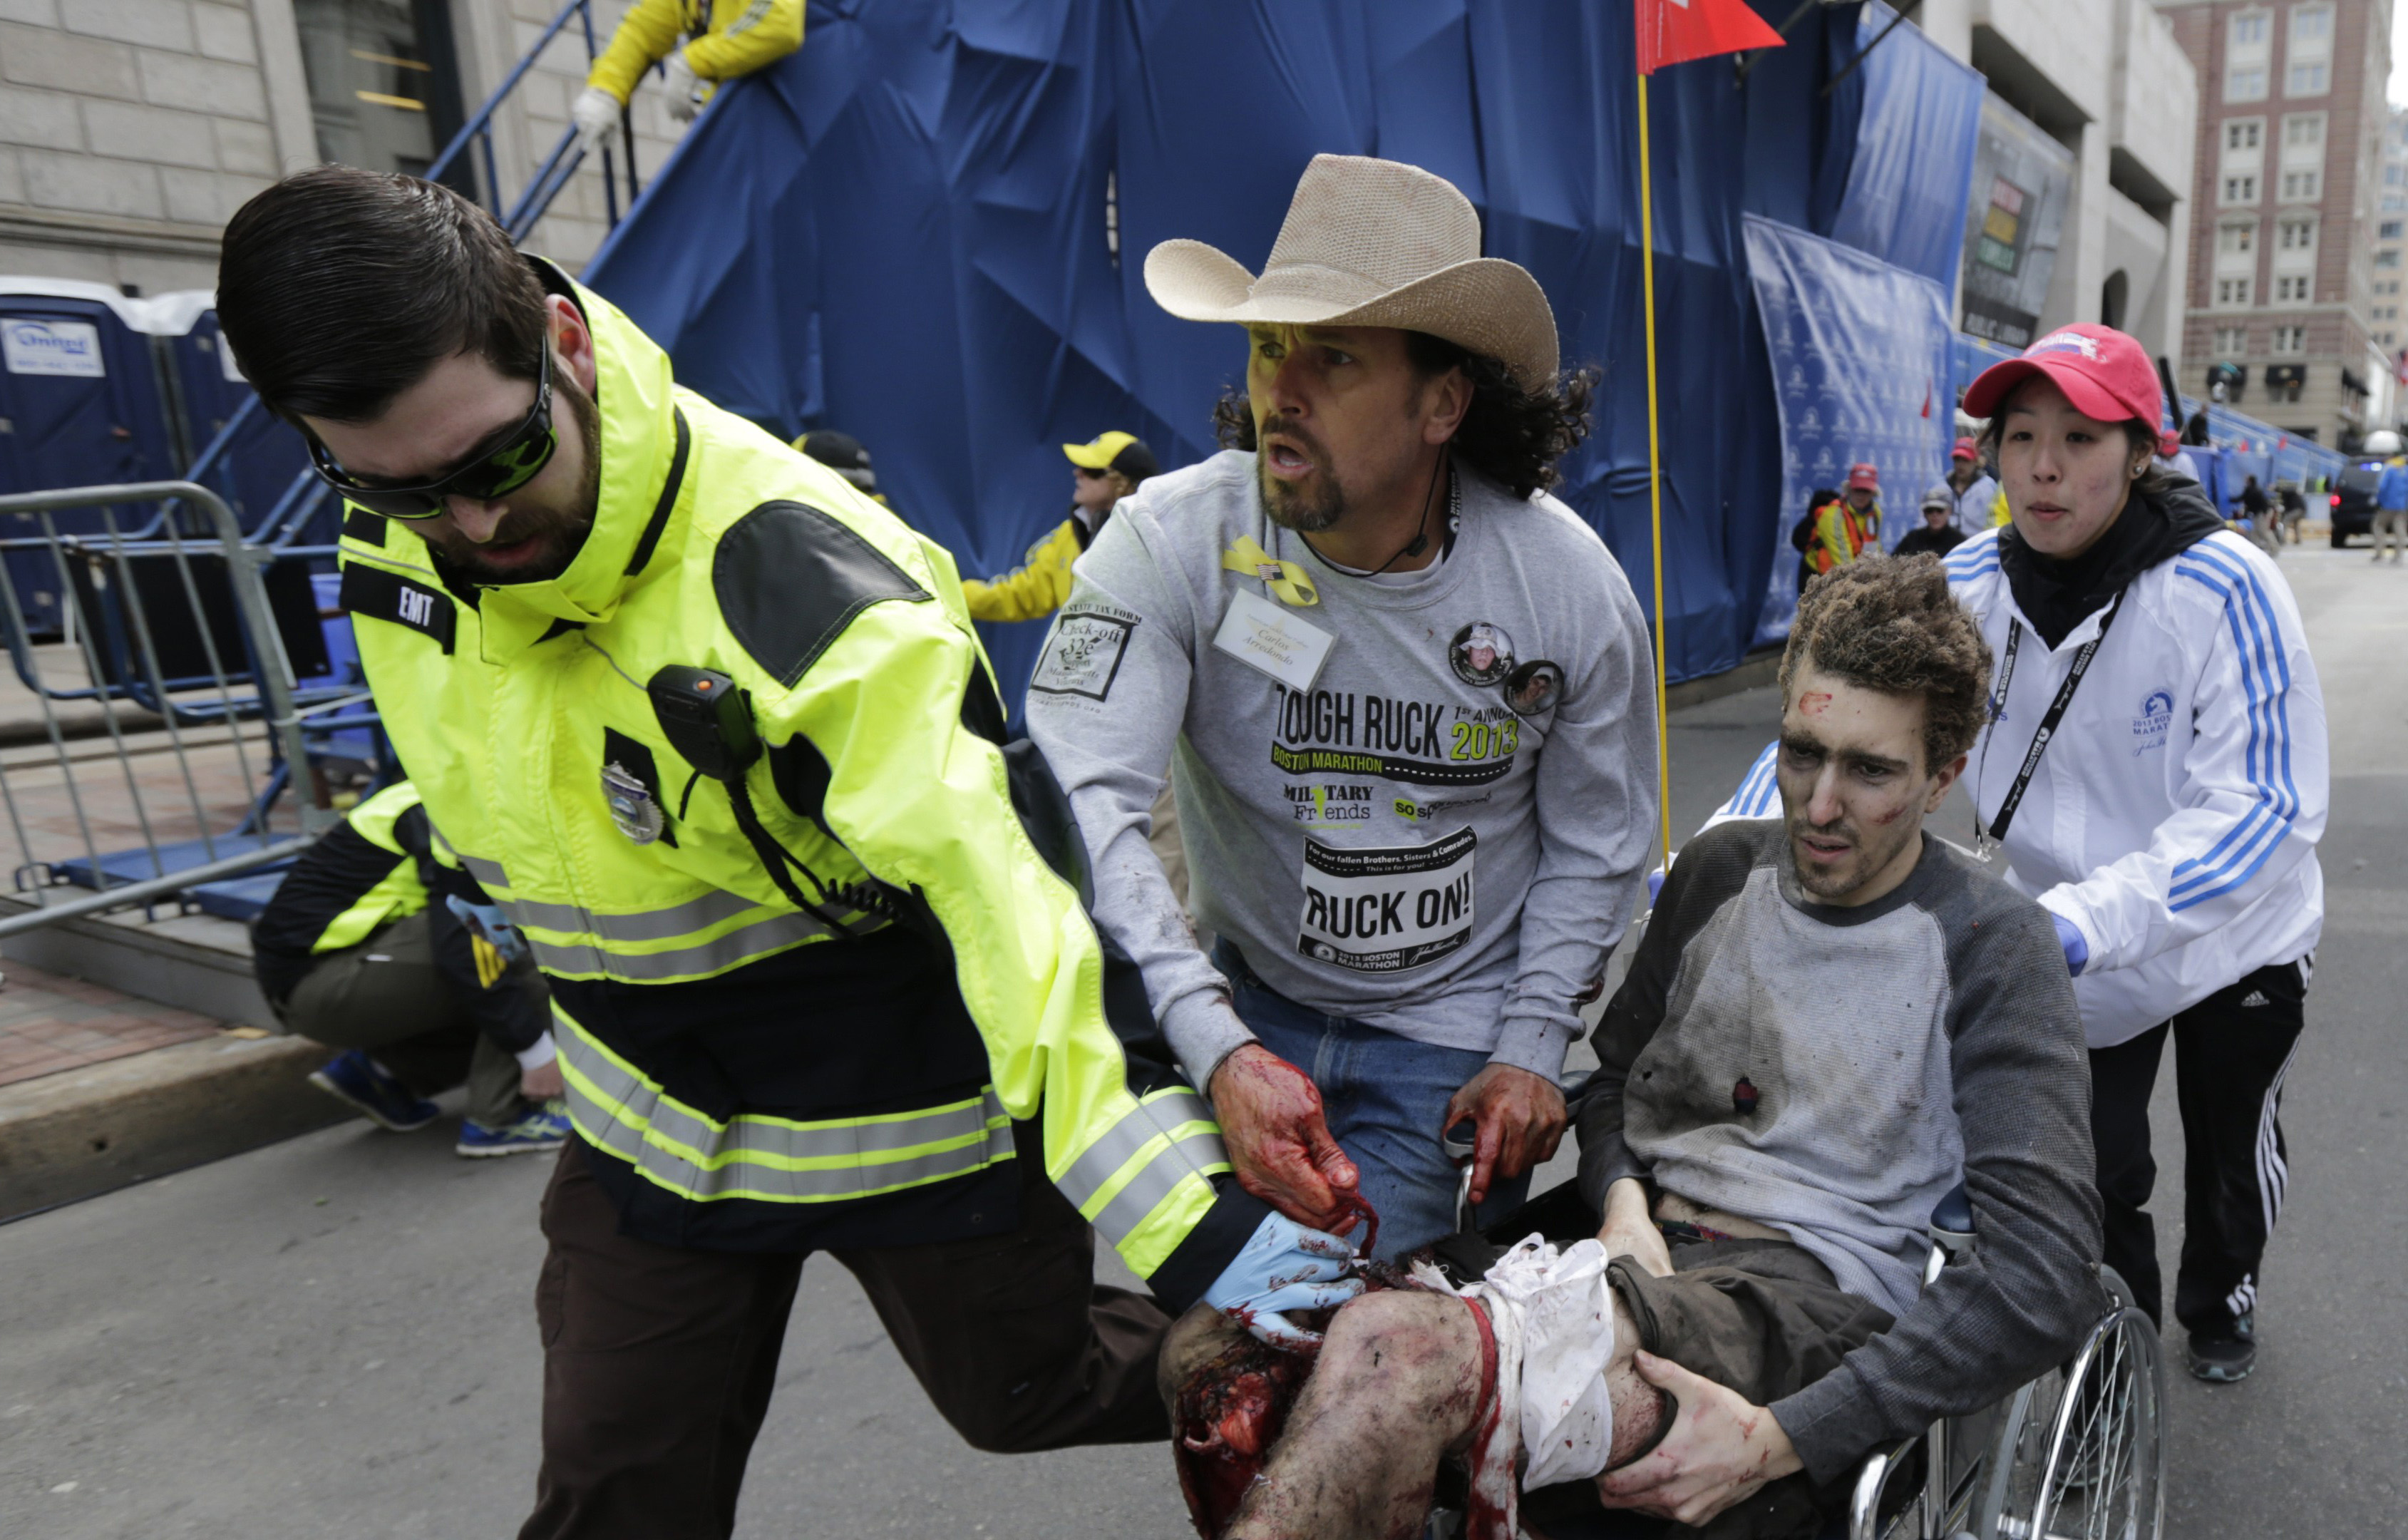 FILE - In this April 15, 2013, file photo, Emergency Medical Services EMT Paul Mitchell, left, Carlos Arredondo, center, and Devin Wang, rear, push Jeff Bauman in a wheelchair after he was injured in one of two explosions near the finish line of the Boston Marathon in Boston. Bauman testified Thursday, March 5, 2015, in the federal death penalty trial of Dzhokhar Tsarnaev in Boston, charged with conspiring with his brother to place twin bombs near the finish line of the race, killing three and injuring 260 people. (AP Photo/Charles Krupa, File)